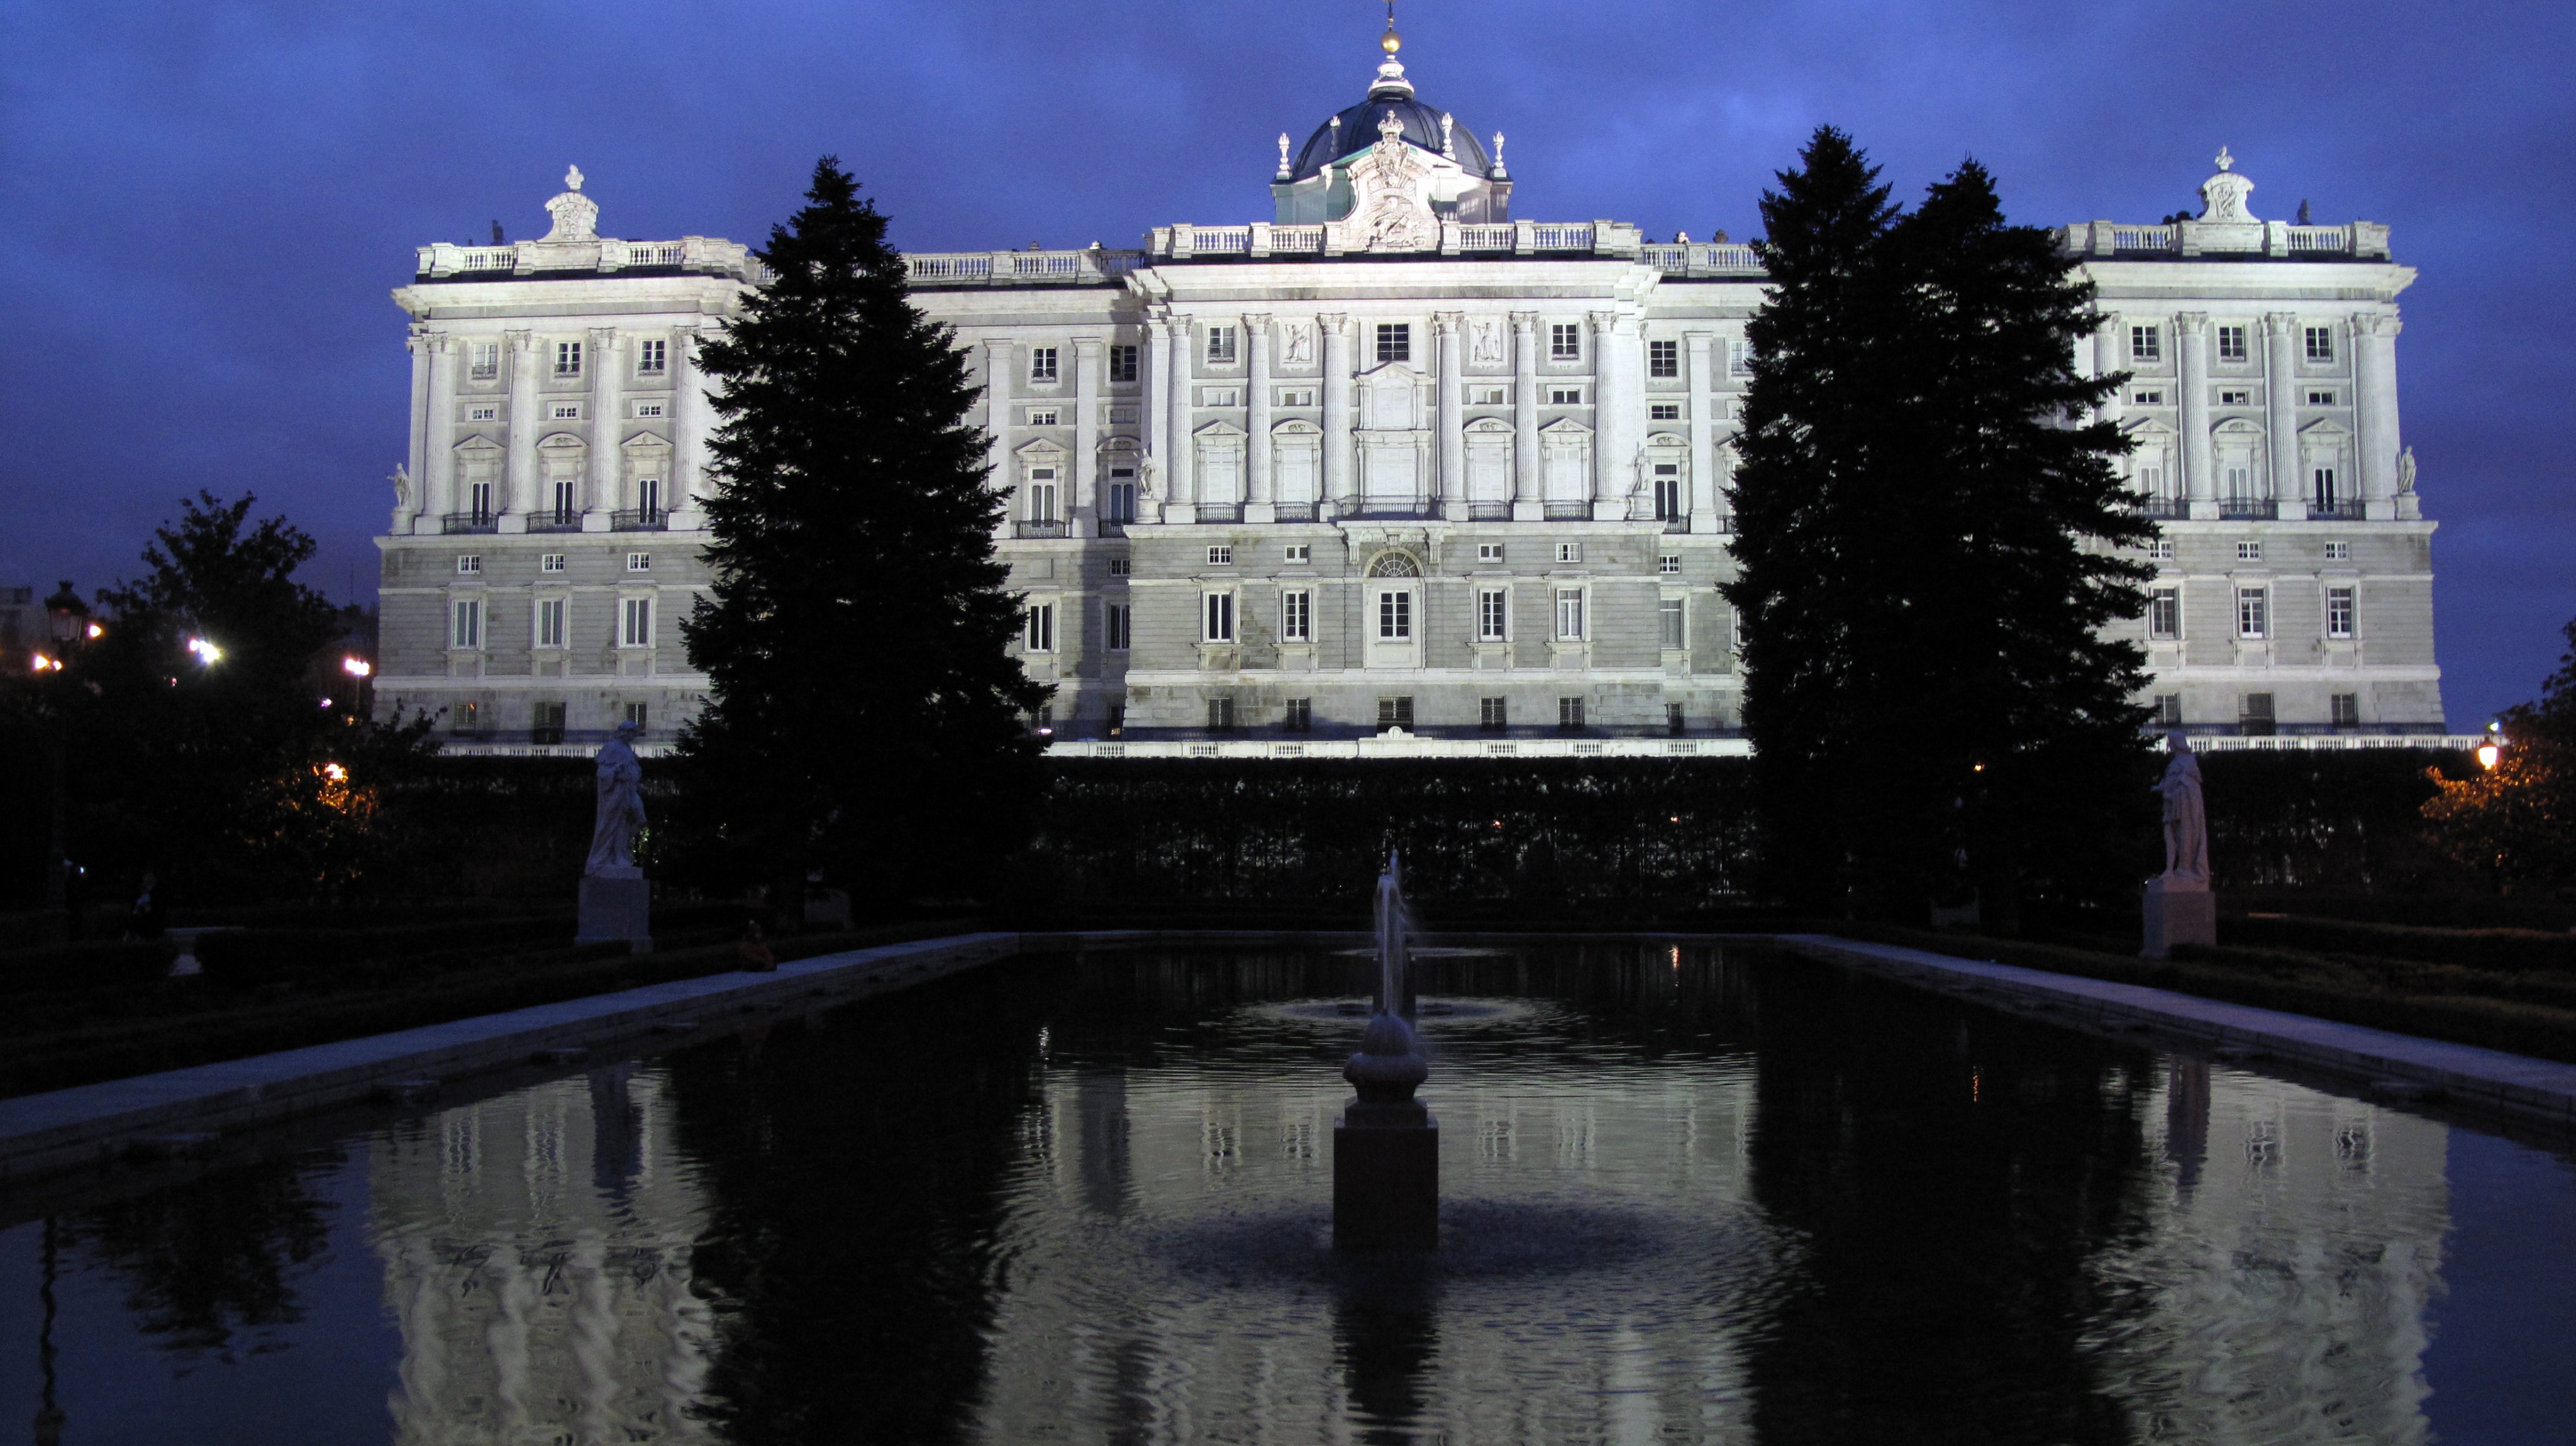 Night View of the Royal Palace from the Gardens of Sabatini, Madrid